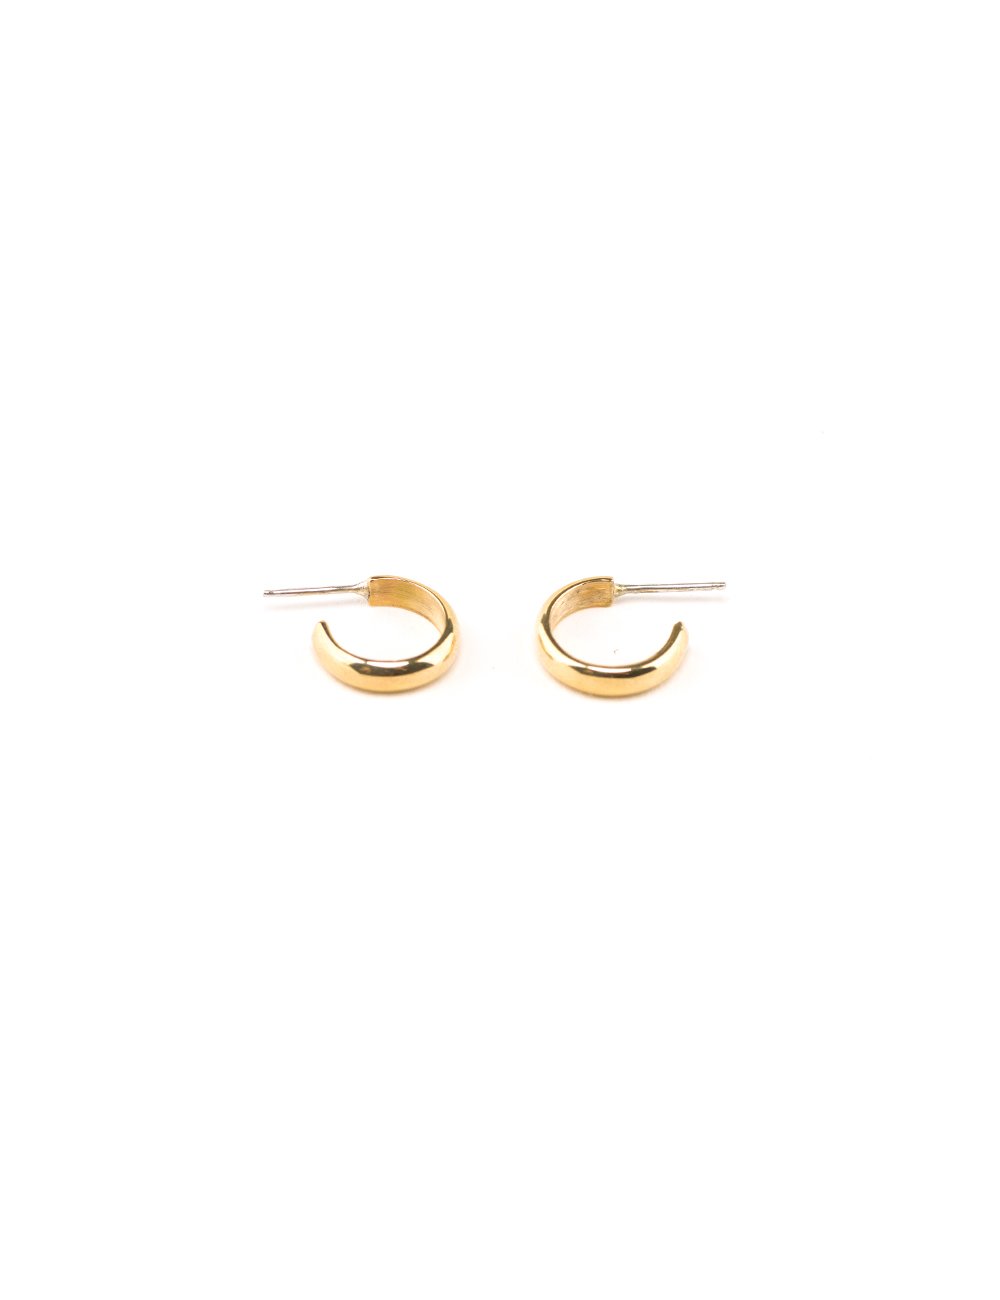 Aries Hoops - Gold Plated